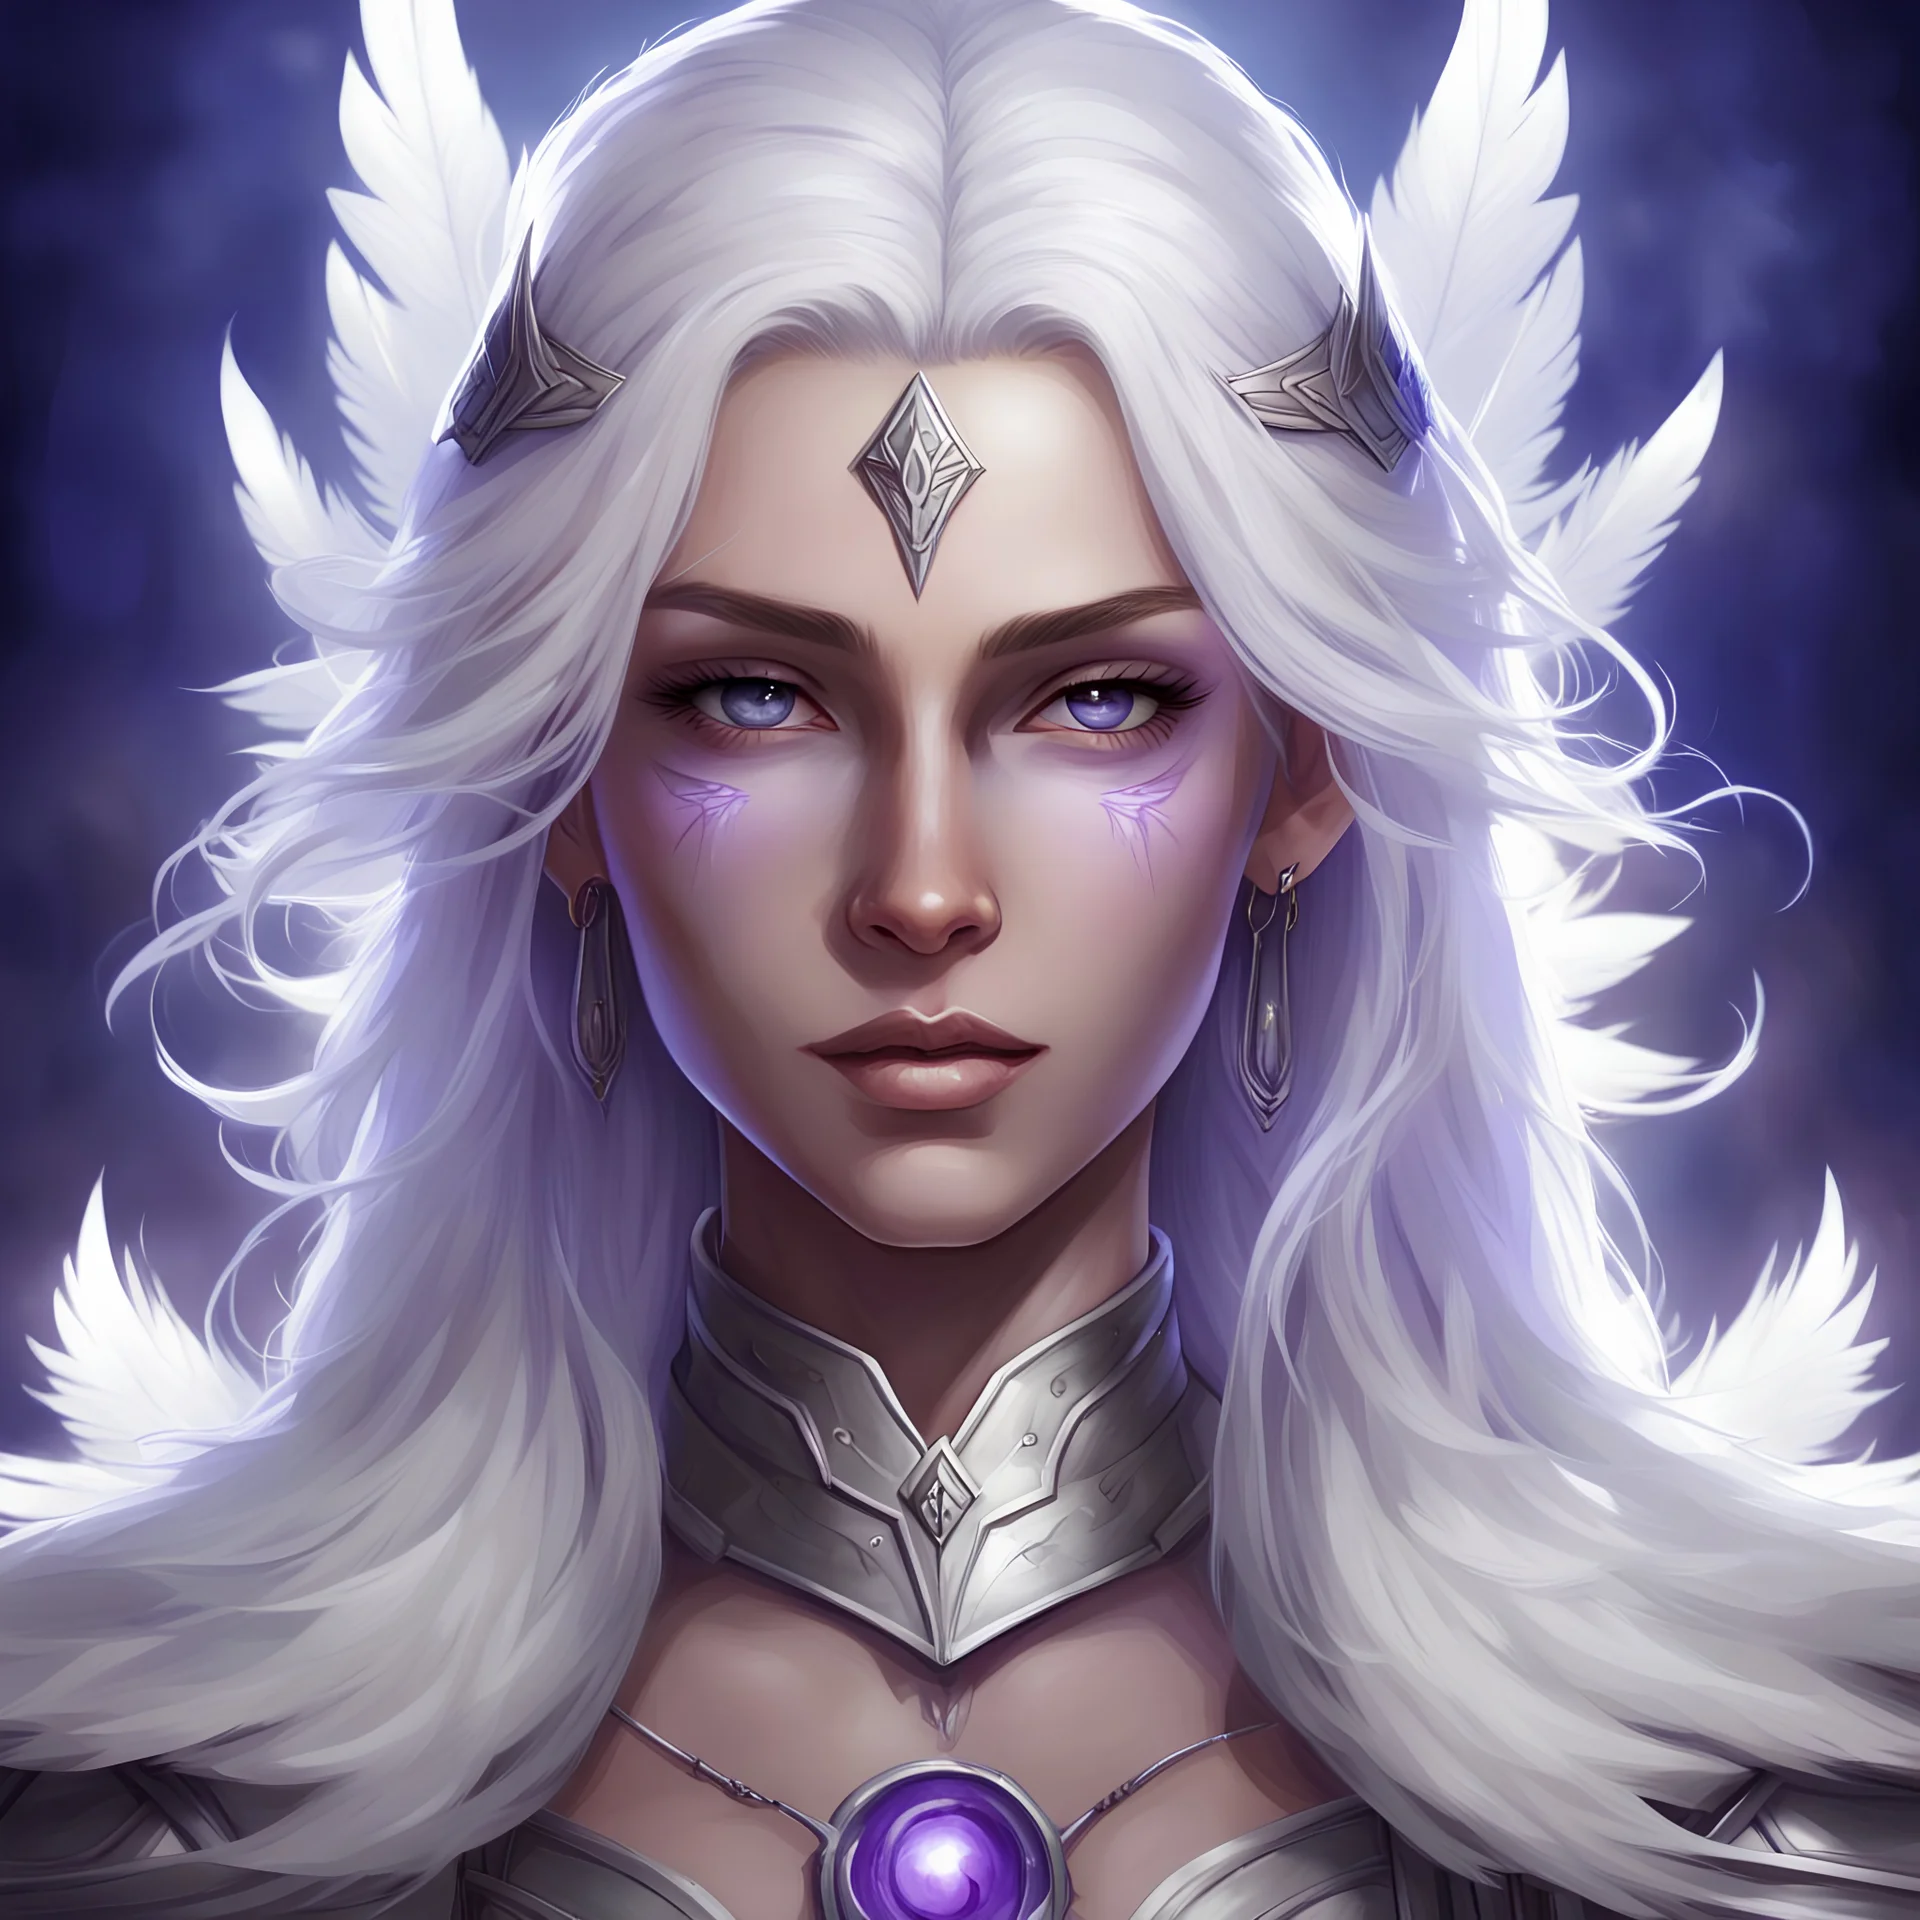 Generate a dungeons and dragons character portrait of a beautiful female paladin aasimar blessed by the goddess Selune. She has long white hair. She has purple eyes. She has some white feathers in the lower part of her long hair. She has a youthful and rounder face. She is in a camp that's lit by moonlight.